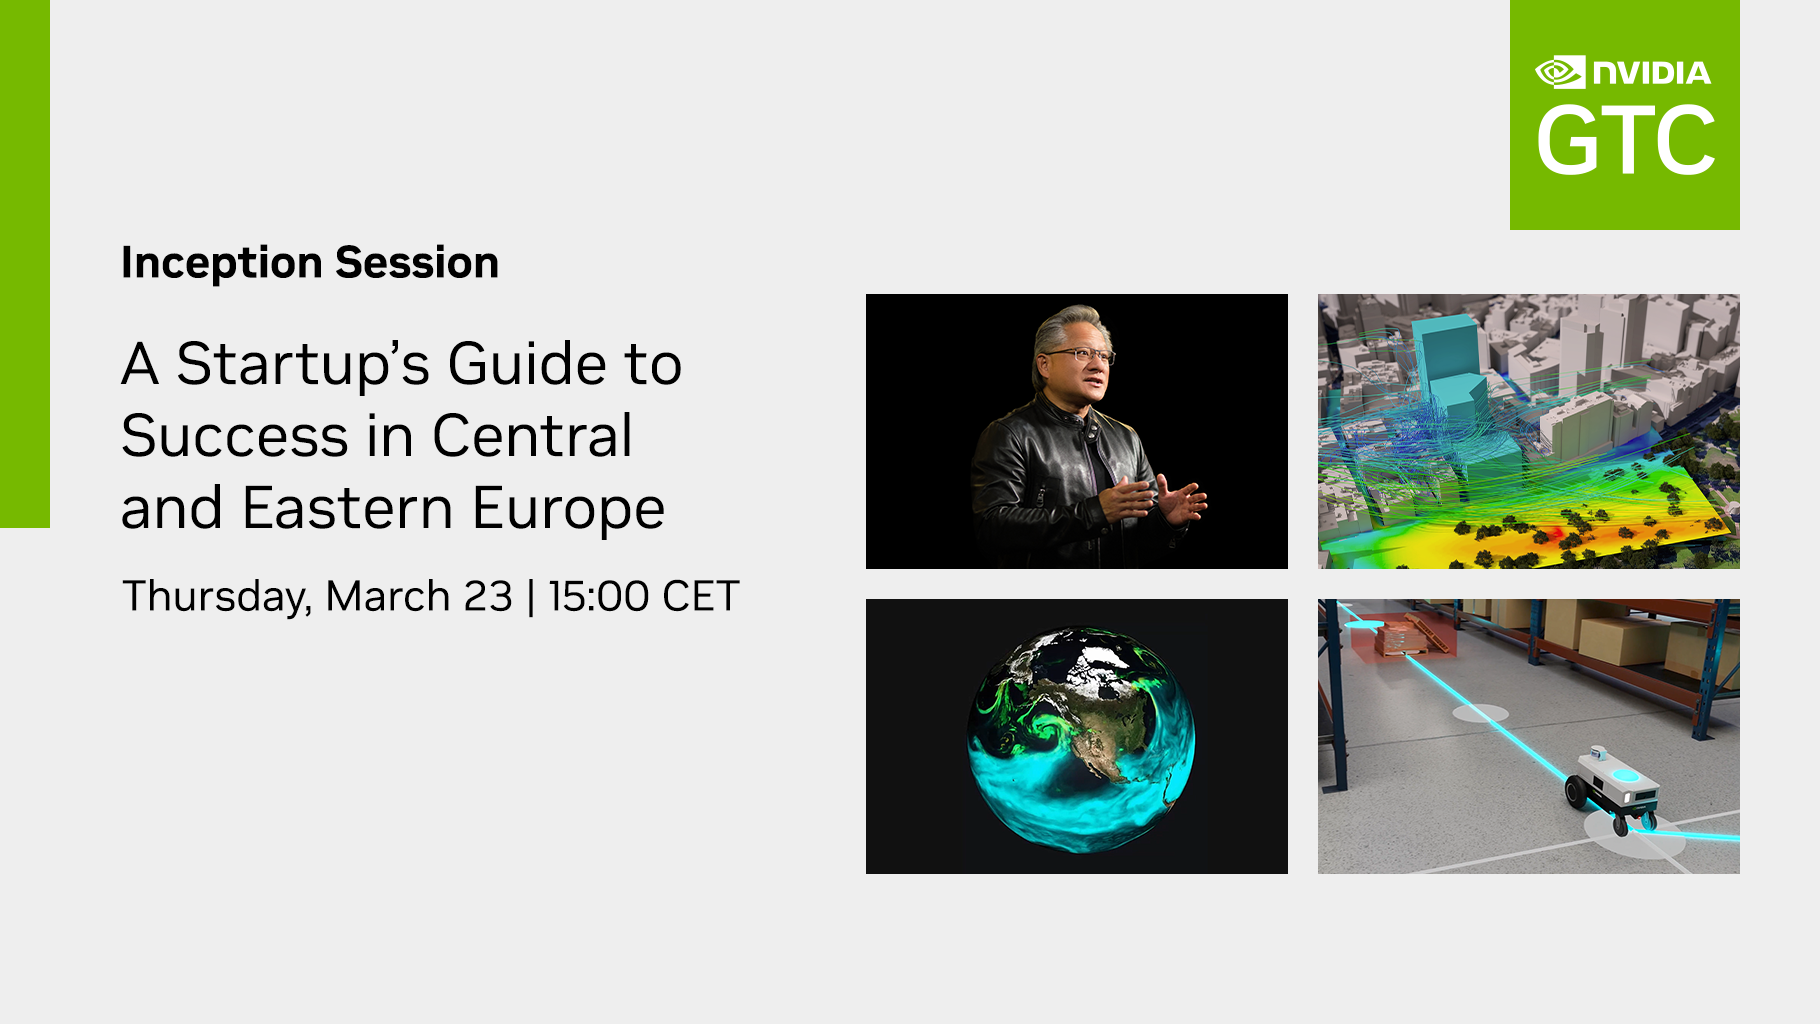 Special event "Startup’s Guide to Success in Central and Eastern Europe" at NVIDIA GTC